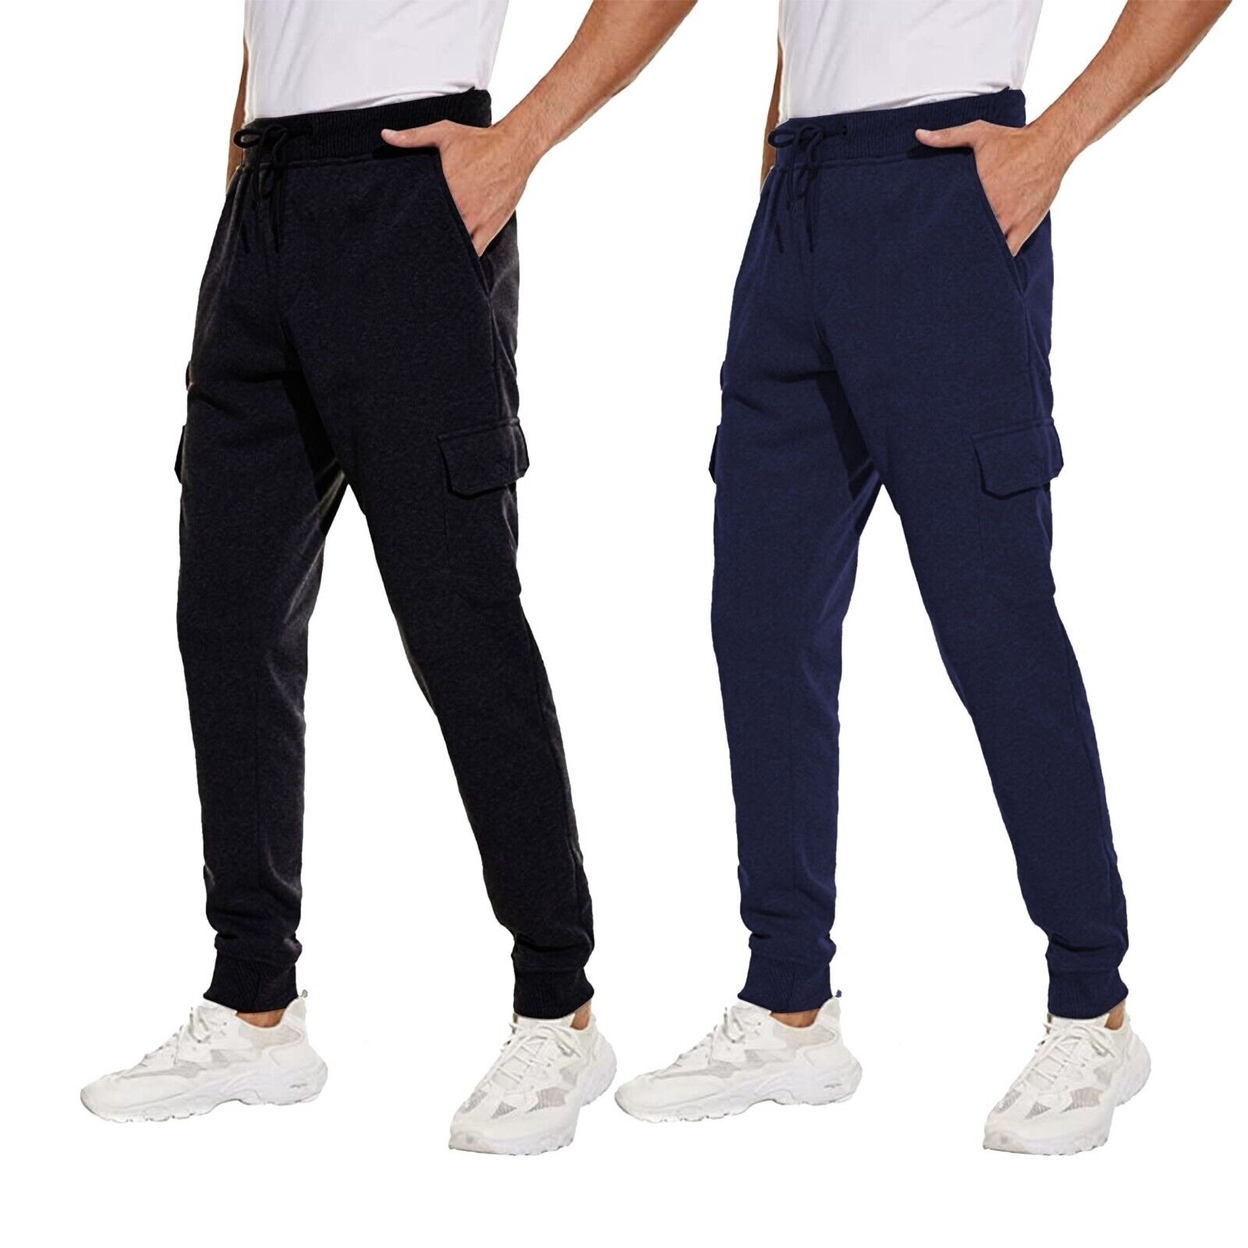 2-Pack Men's Ultra Soft Winter Warm Thick Athletic Sherpa Lined Jogger Pants - Black&navy, X-large